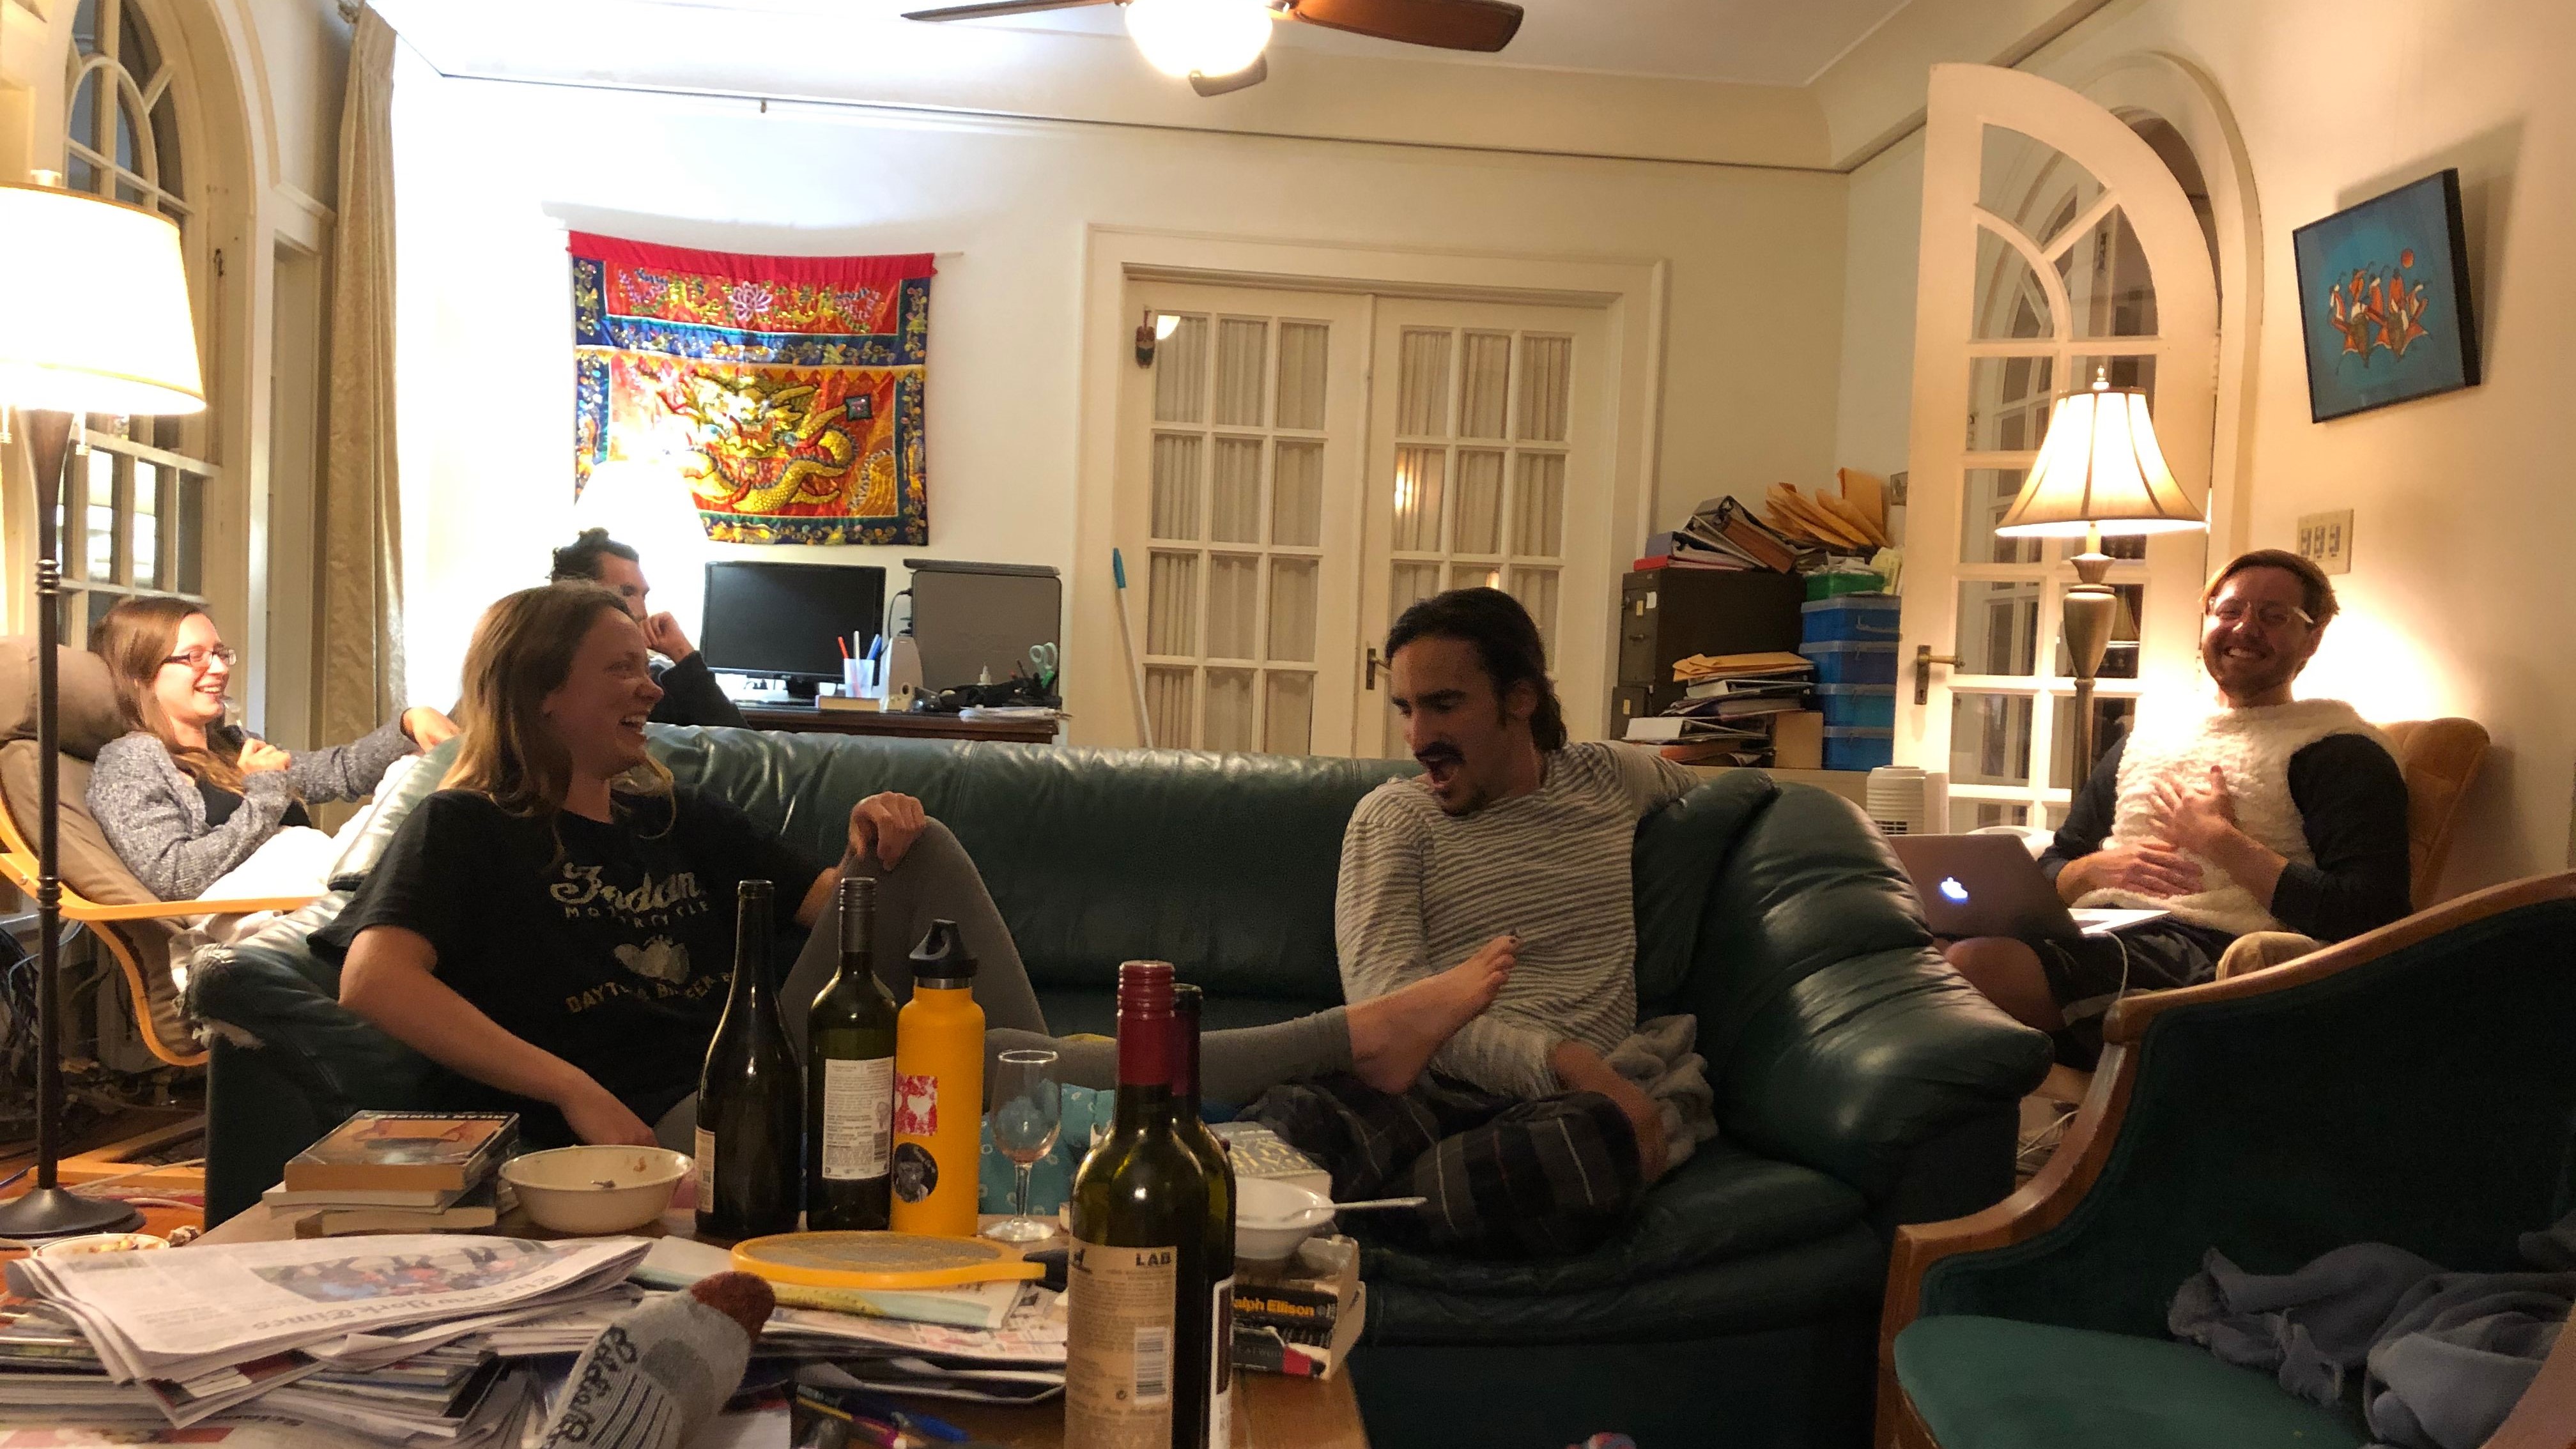 Summiteers casually hang out in the living room in the evening. (Circa fall 2020)